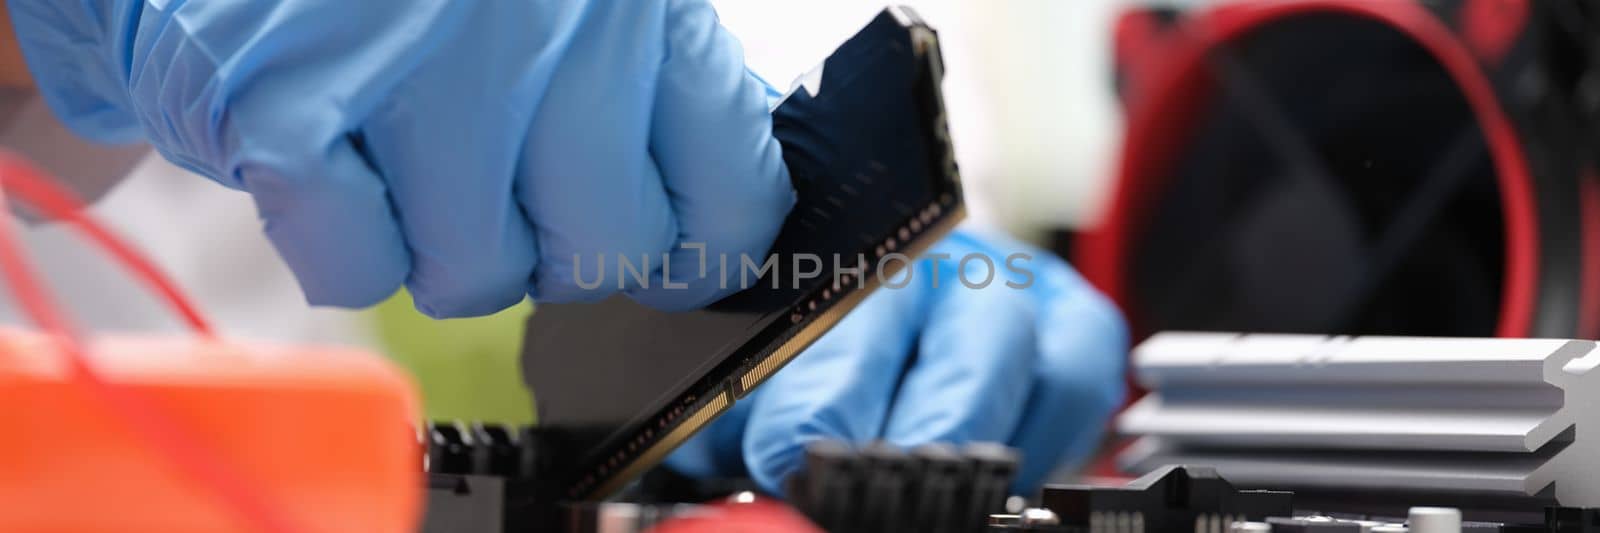 Repair engineer holds RAM chip with hands and inserts RAM of computer into socket of computer motherboard. Building computer concept